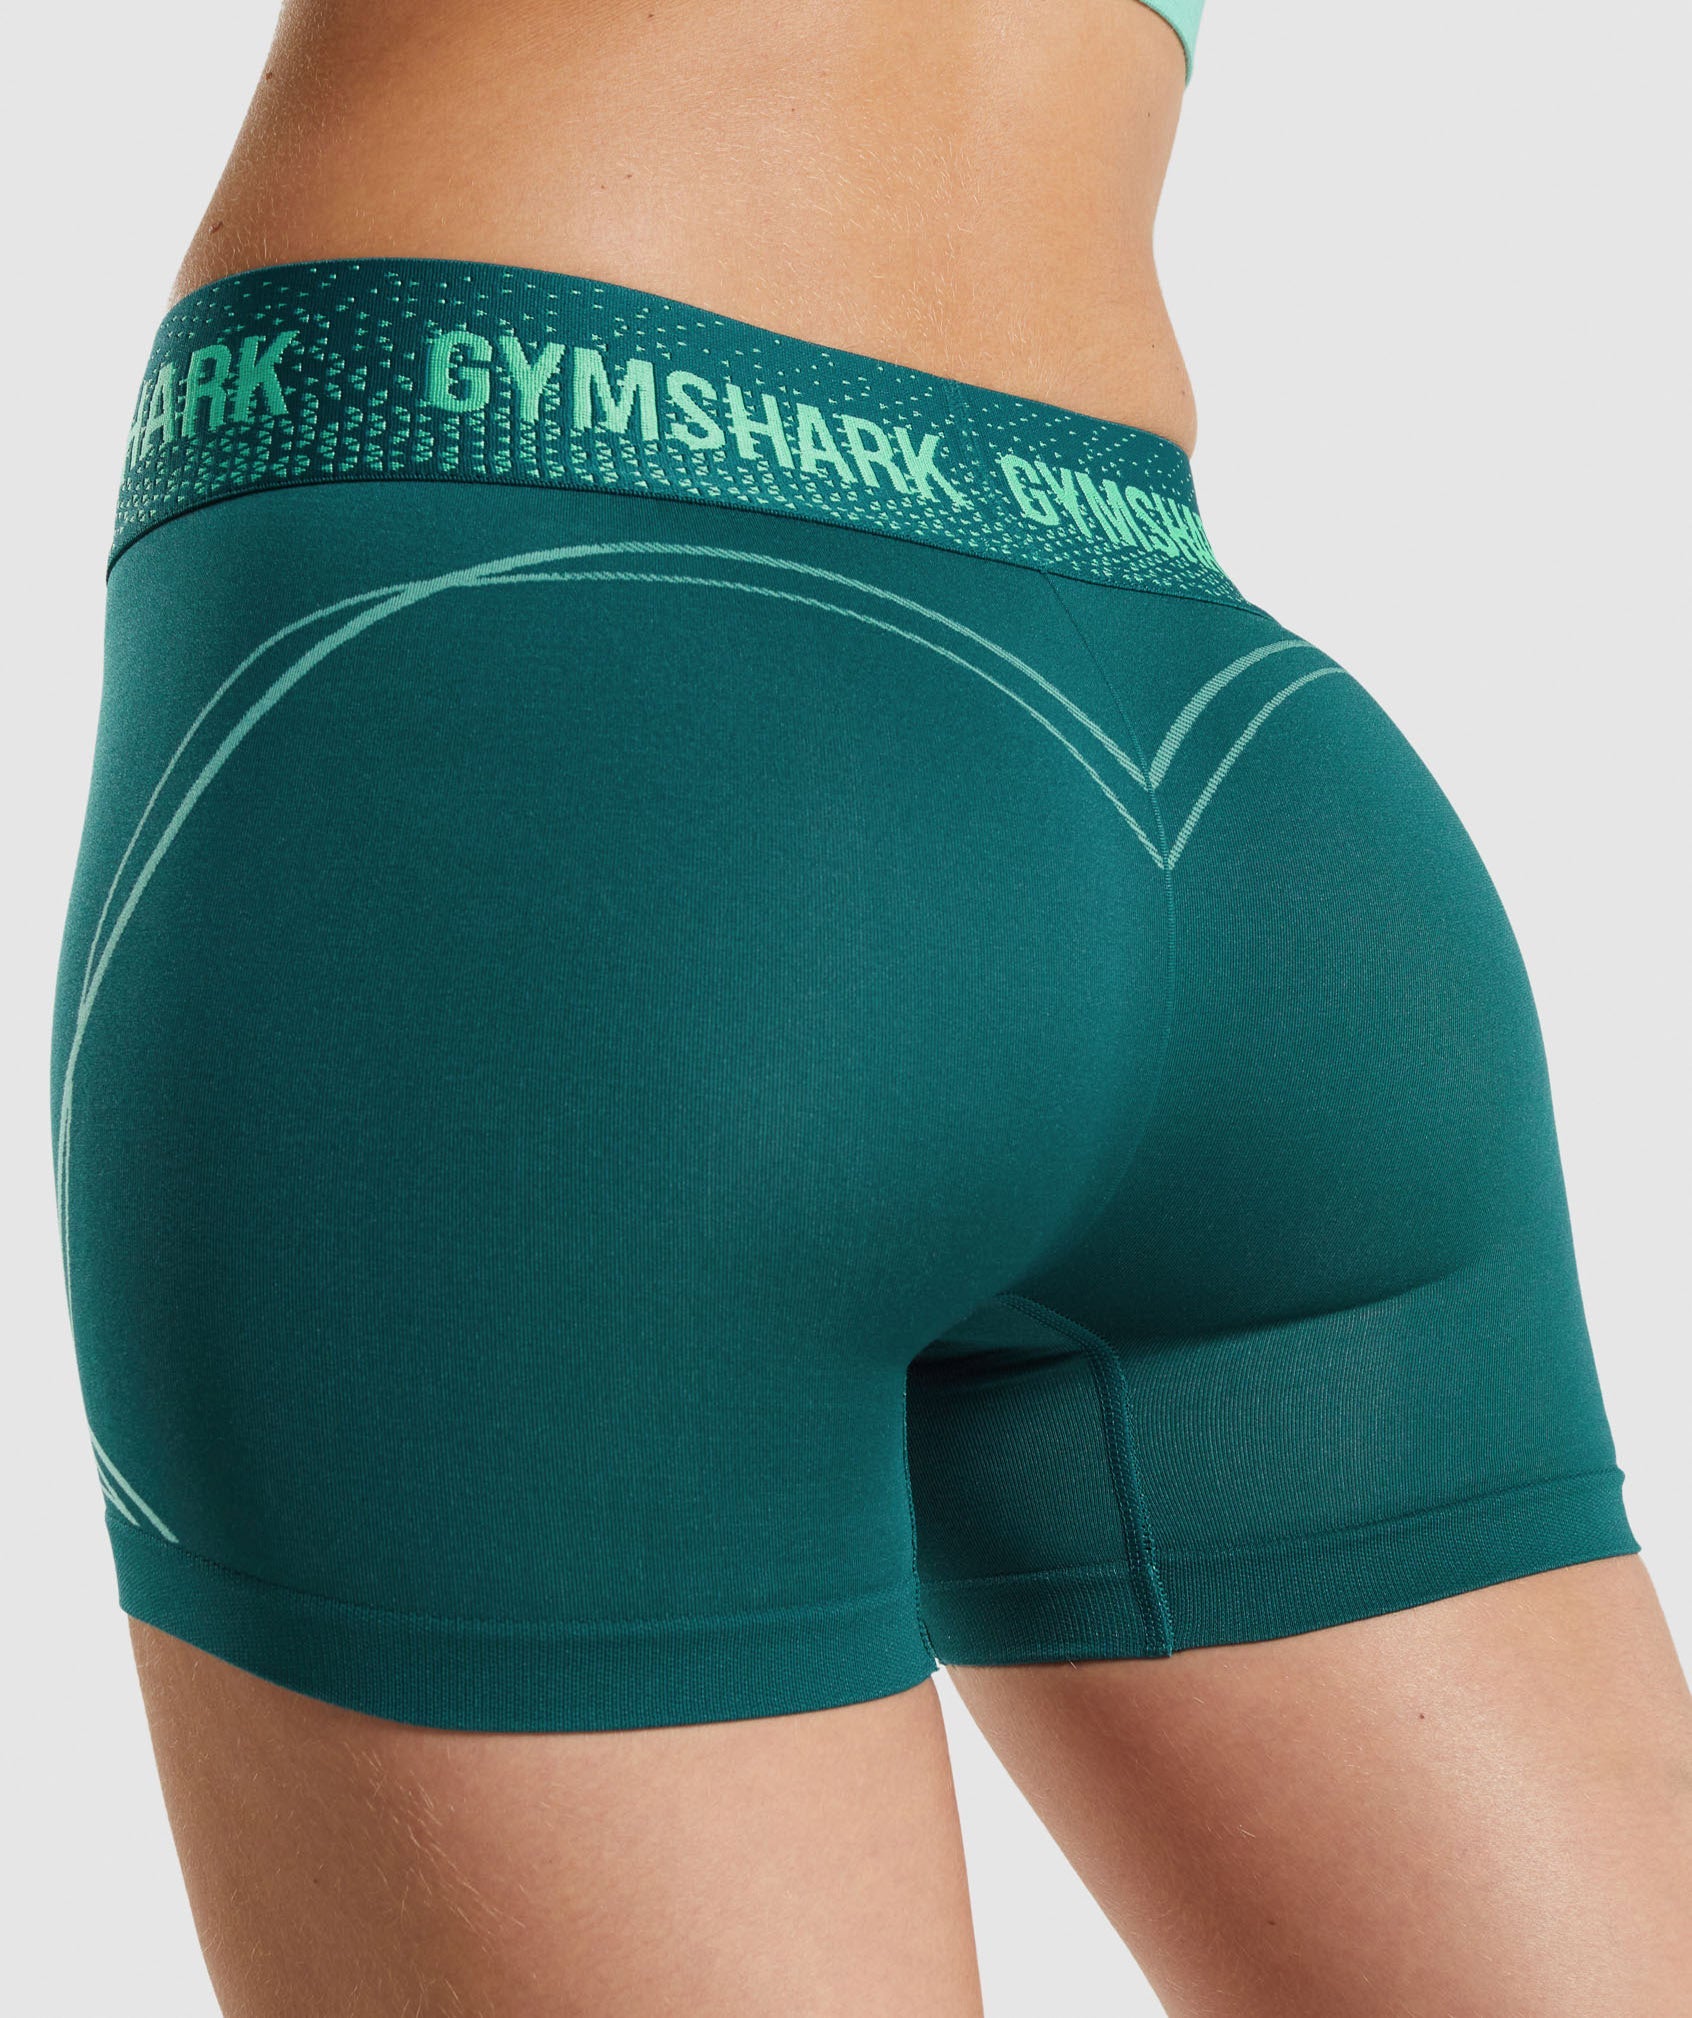 Apex Seamless Low Rise Shorts in Teal - view 5